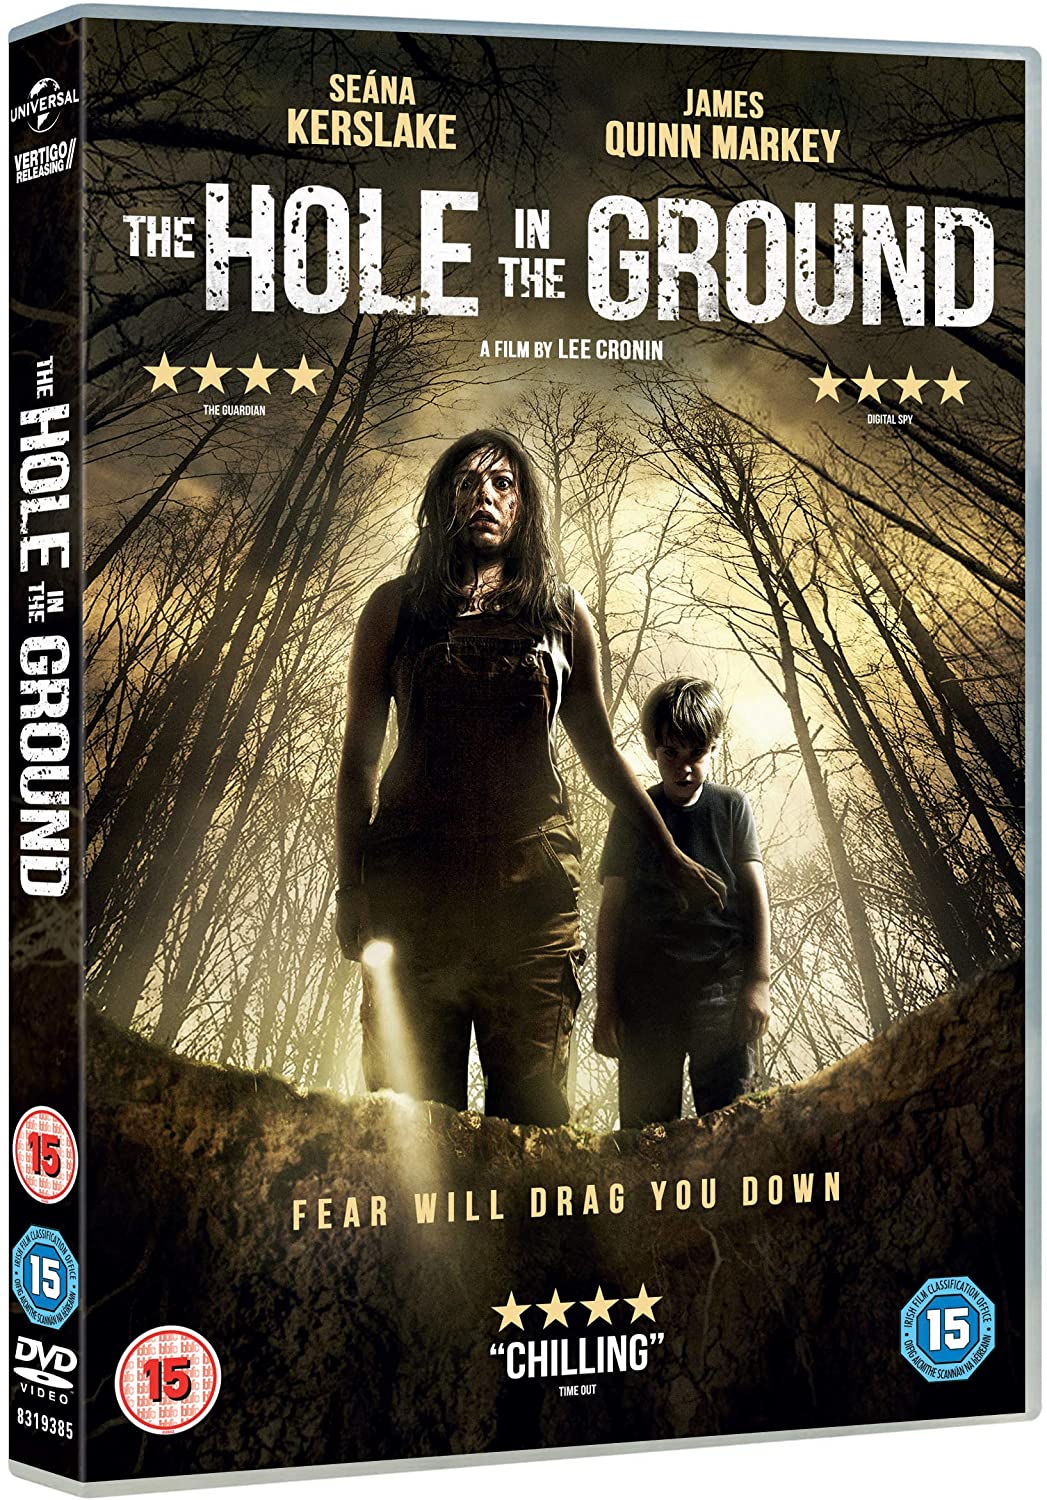 The Hole in the Ground - Horror/Thriller [DVD]